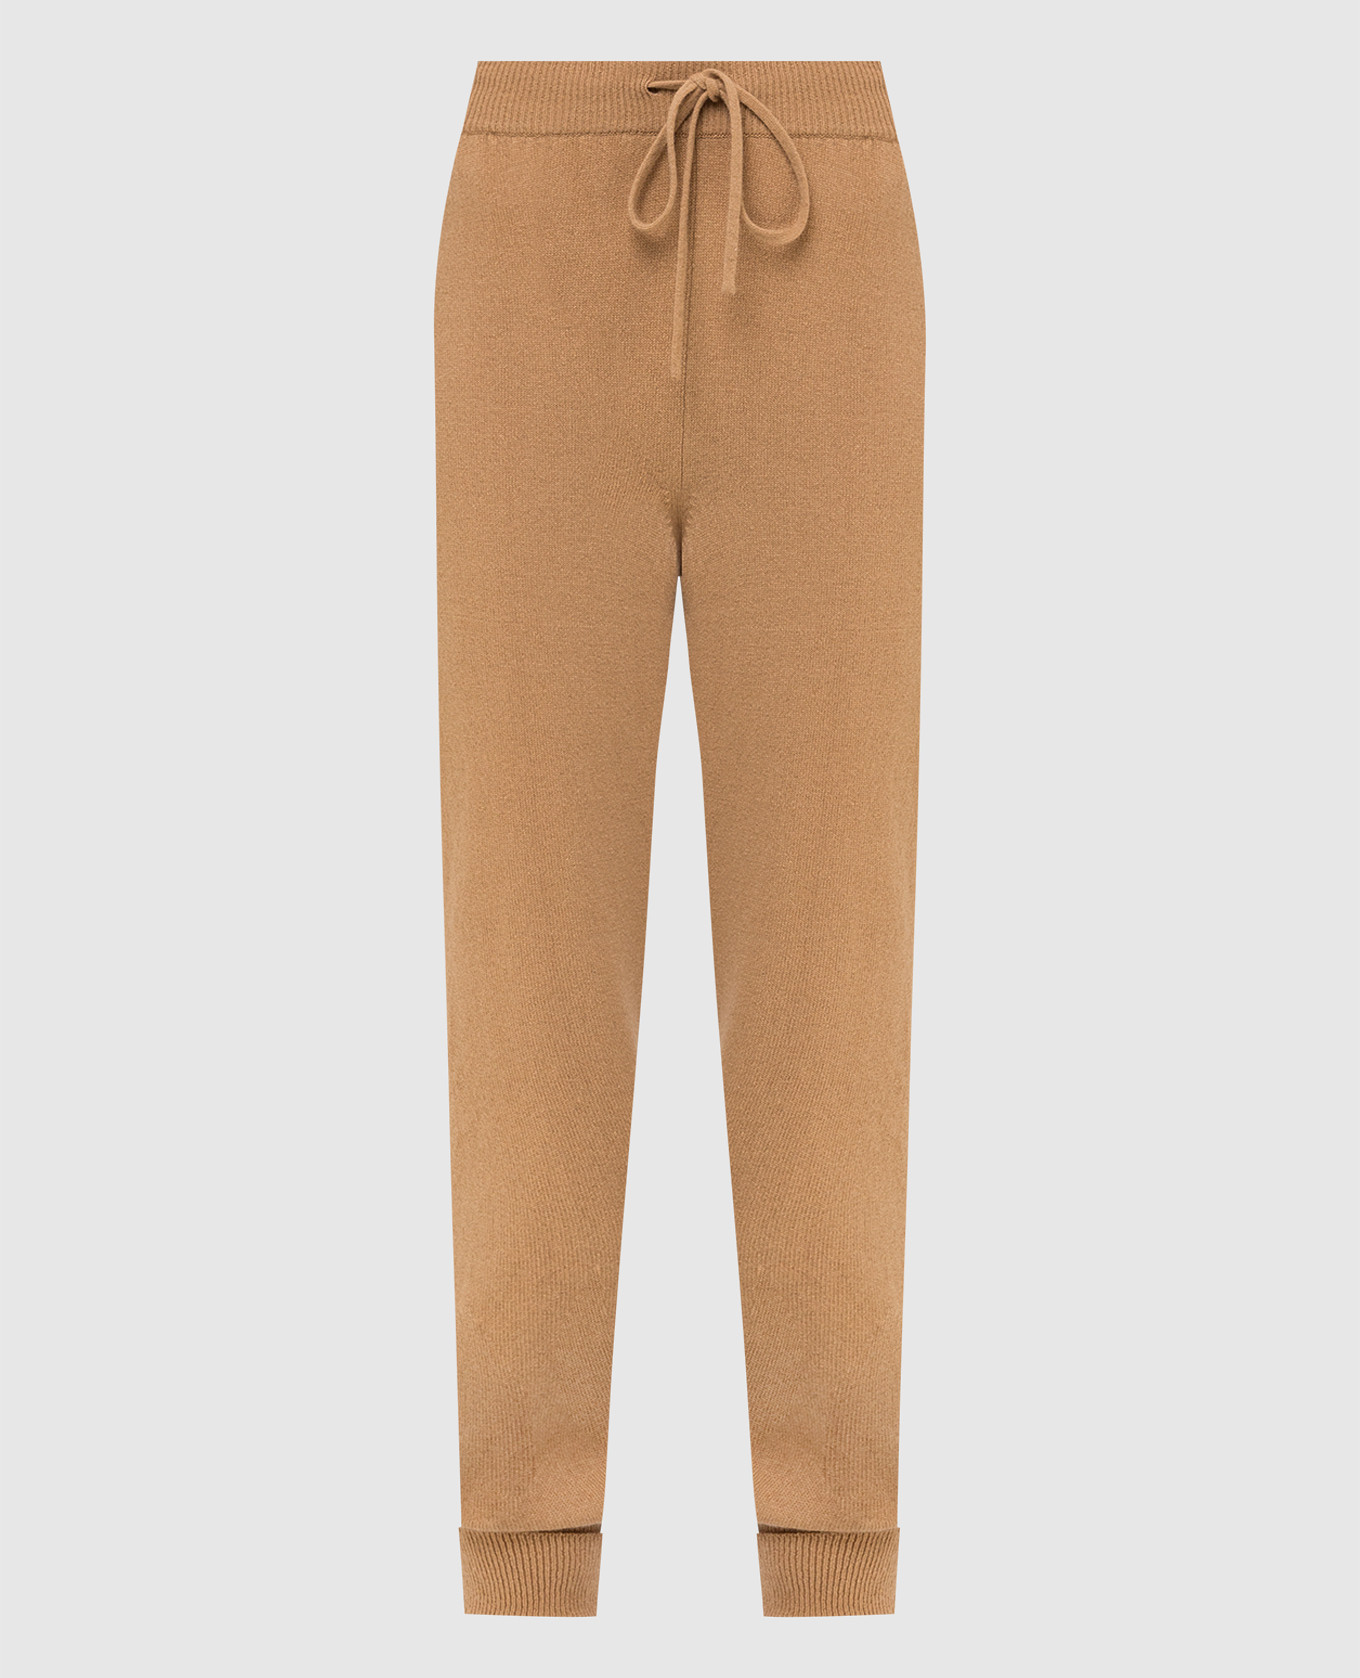 Beige wool and cashmere joggers